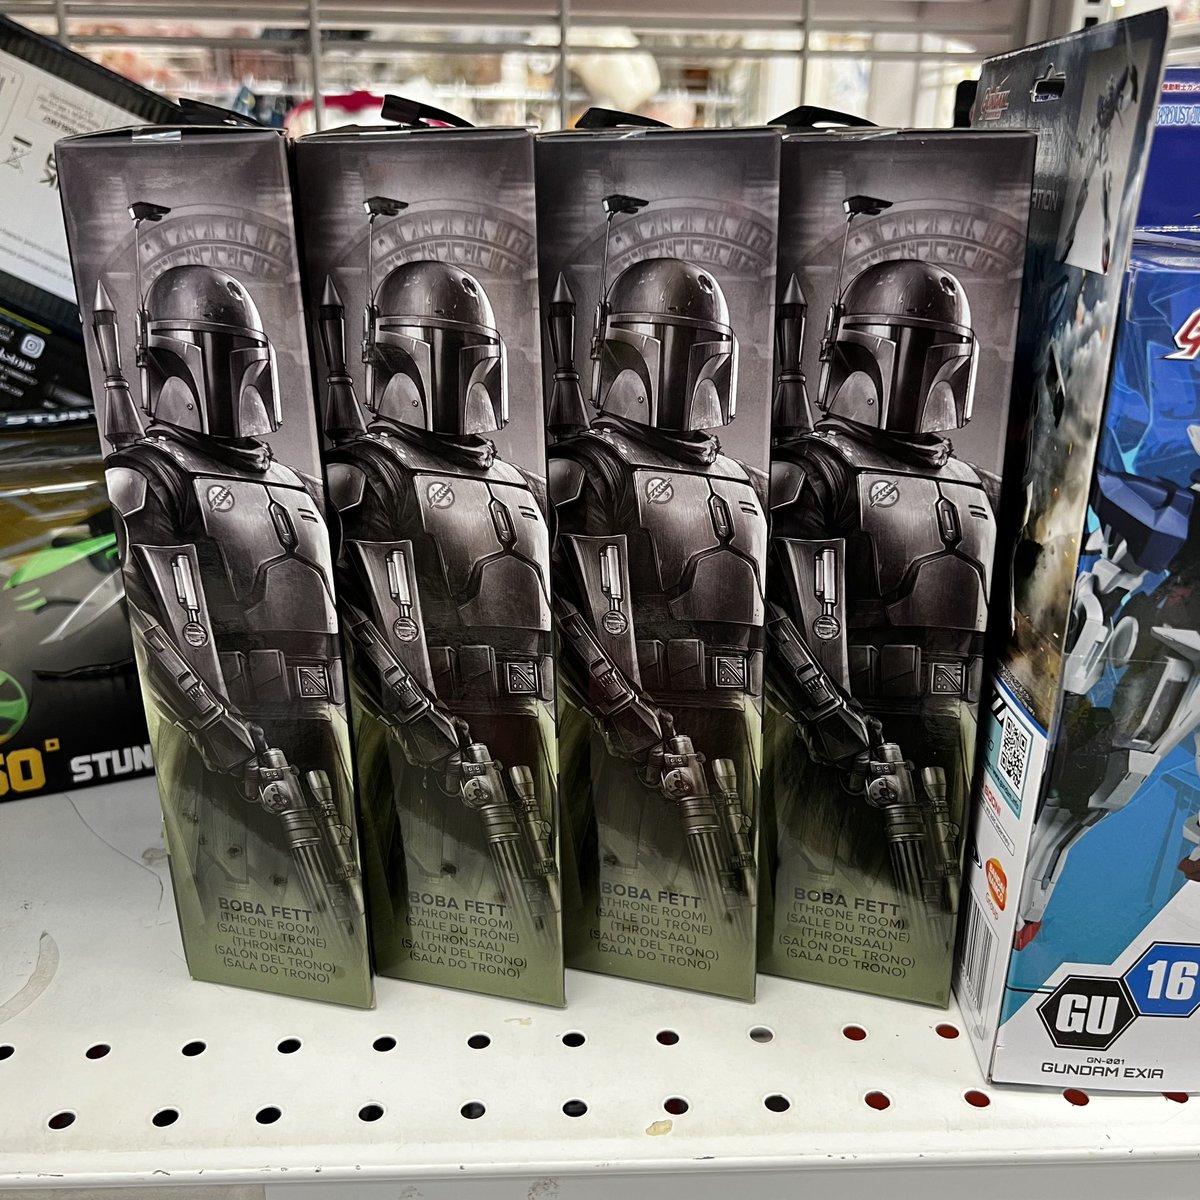 Walked into some $6 Bobas today at Ross in AZ. 

#bobafett #thebookofbobafett #starwarstheblackseries #blackseries #blackseries6inch #starwars #starwarstoys #actionfigures #toycollector #toycommunity #toydeals #rossfinds #inpursuitoftoys